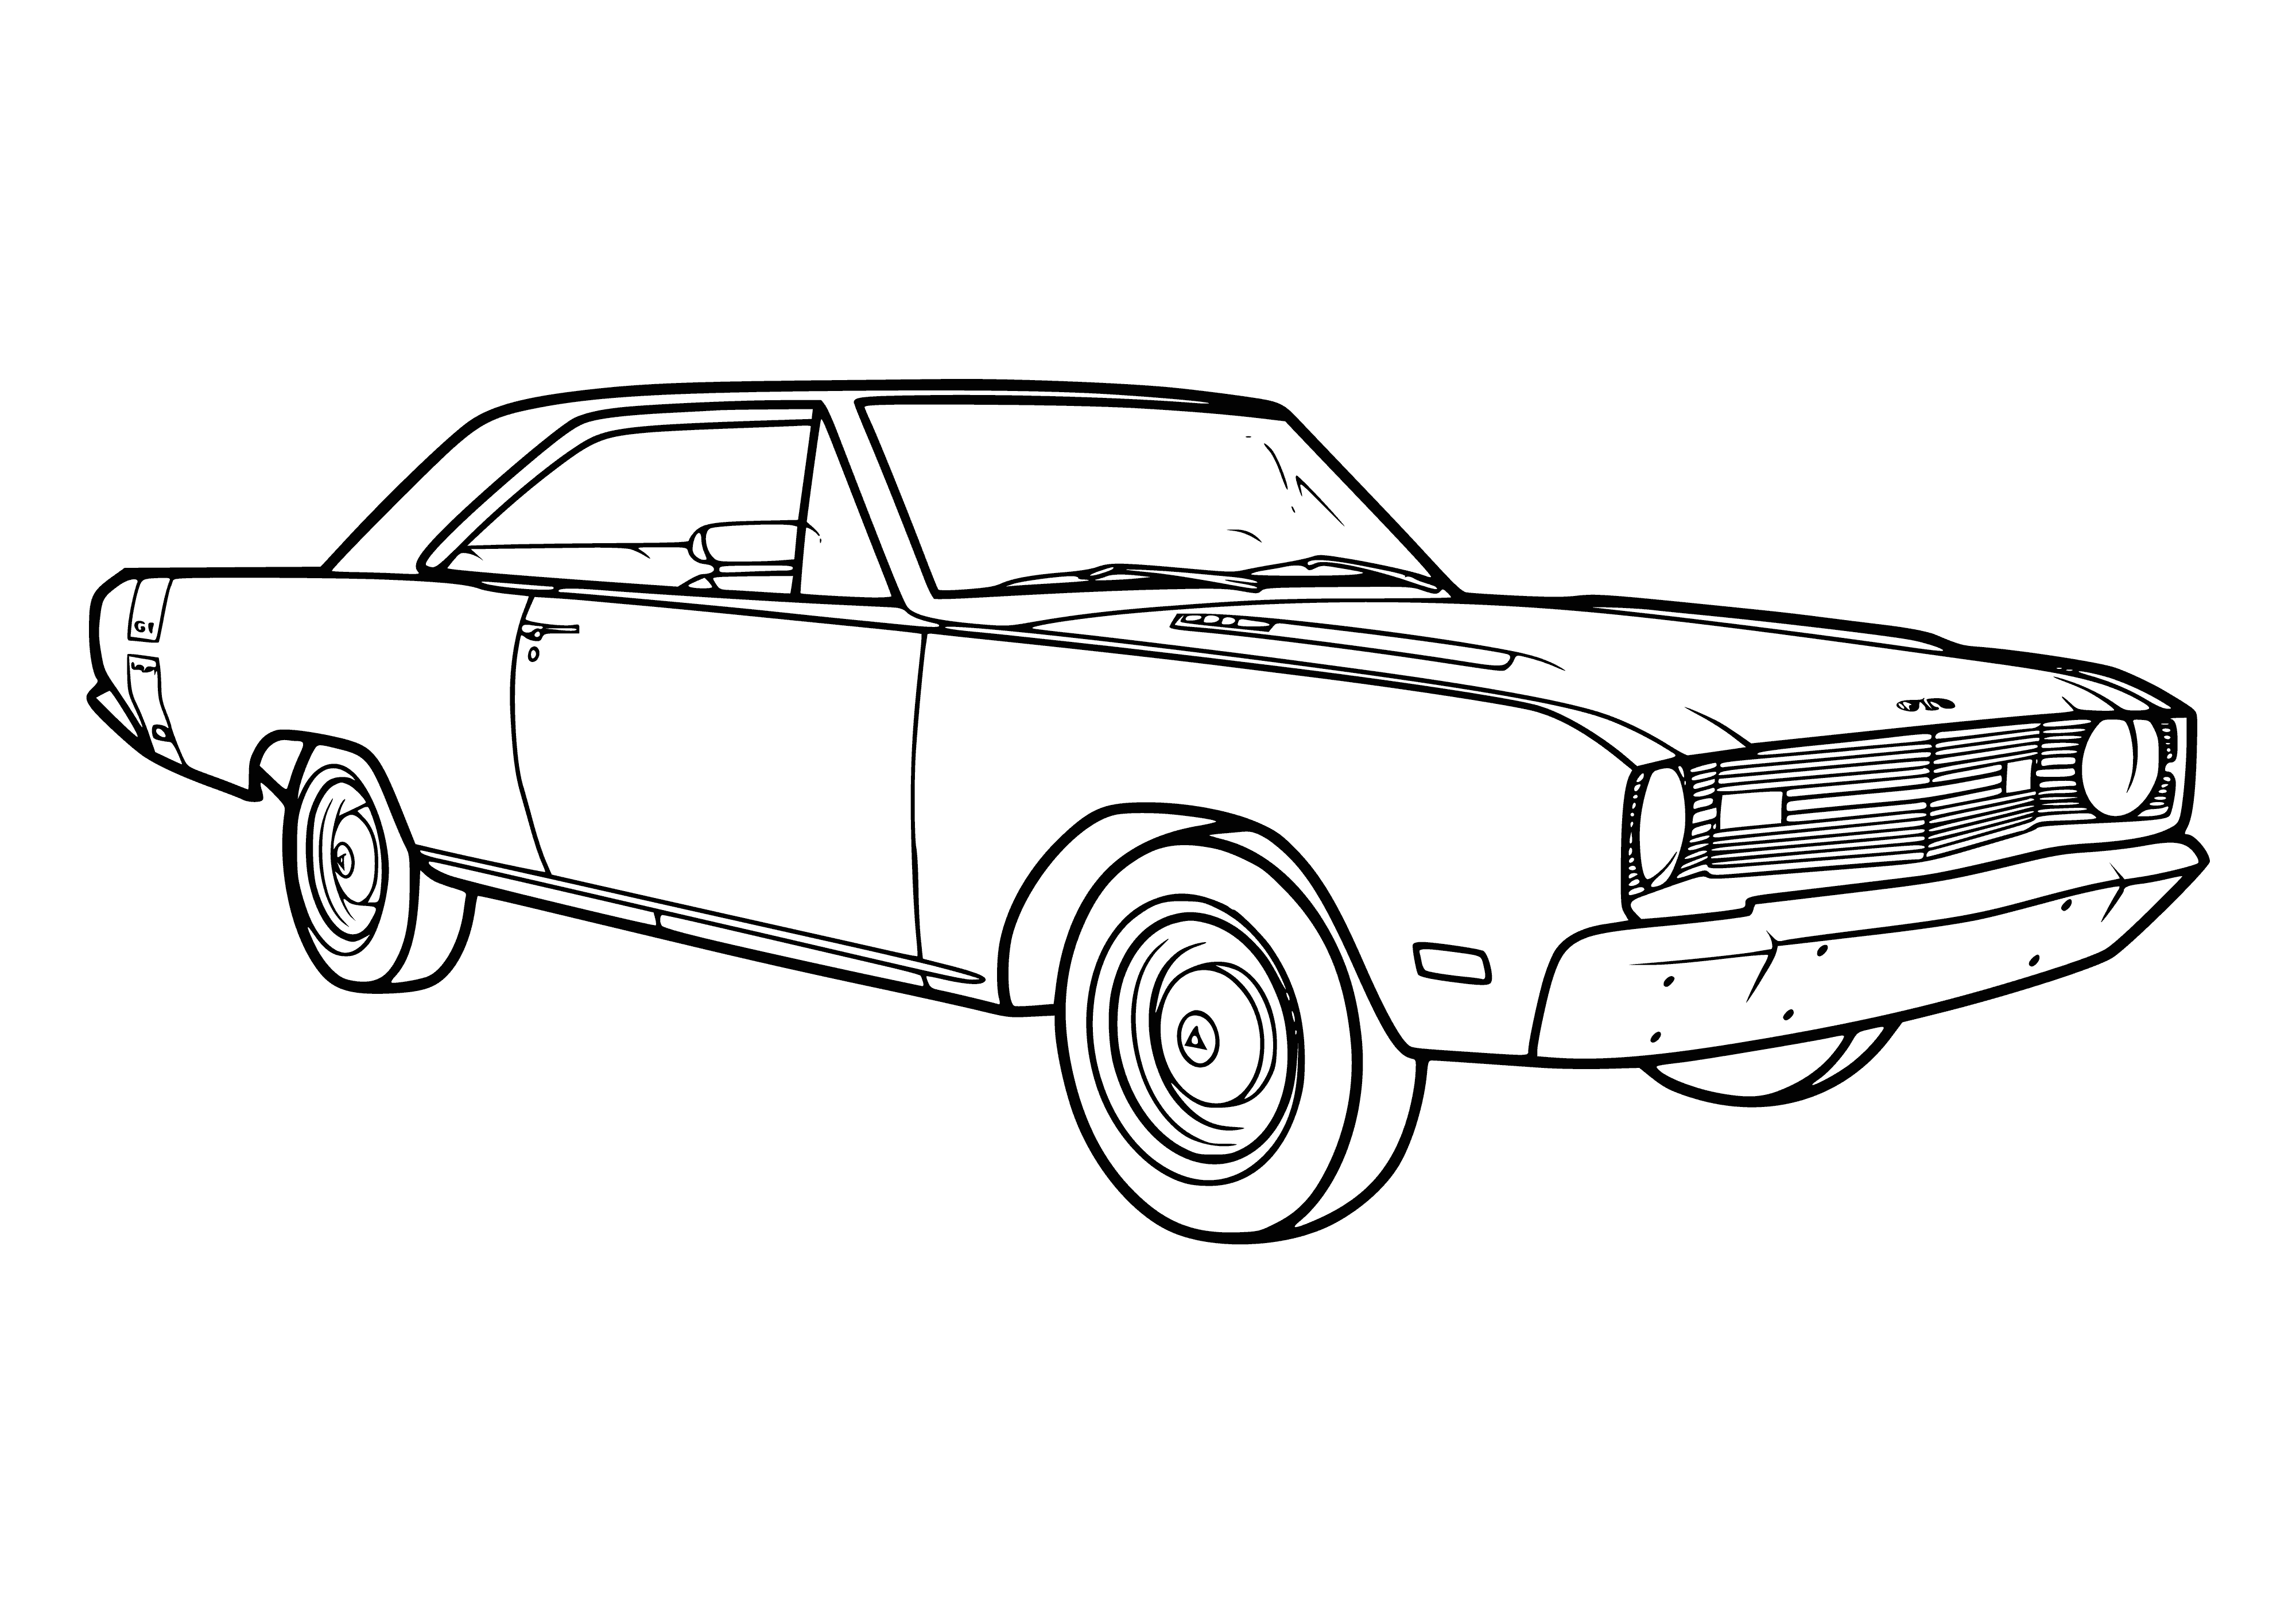 coloring page: Sleek, silver car with tinted windows, low to ground & big wheels with symbol on the grill.